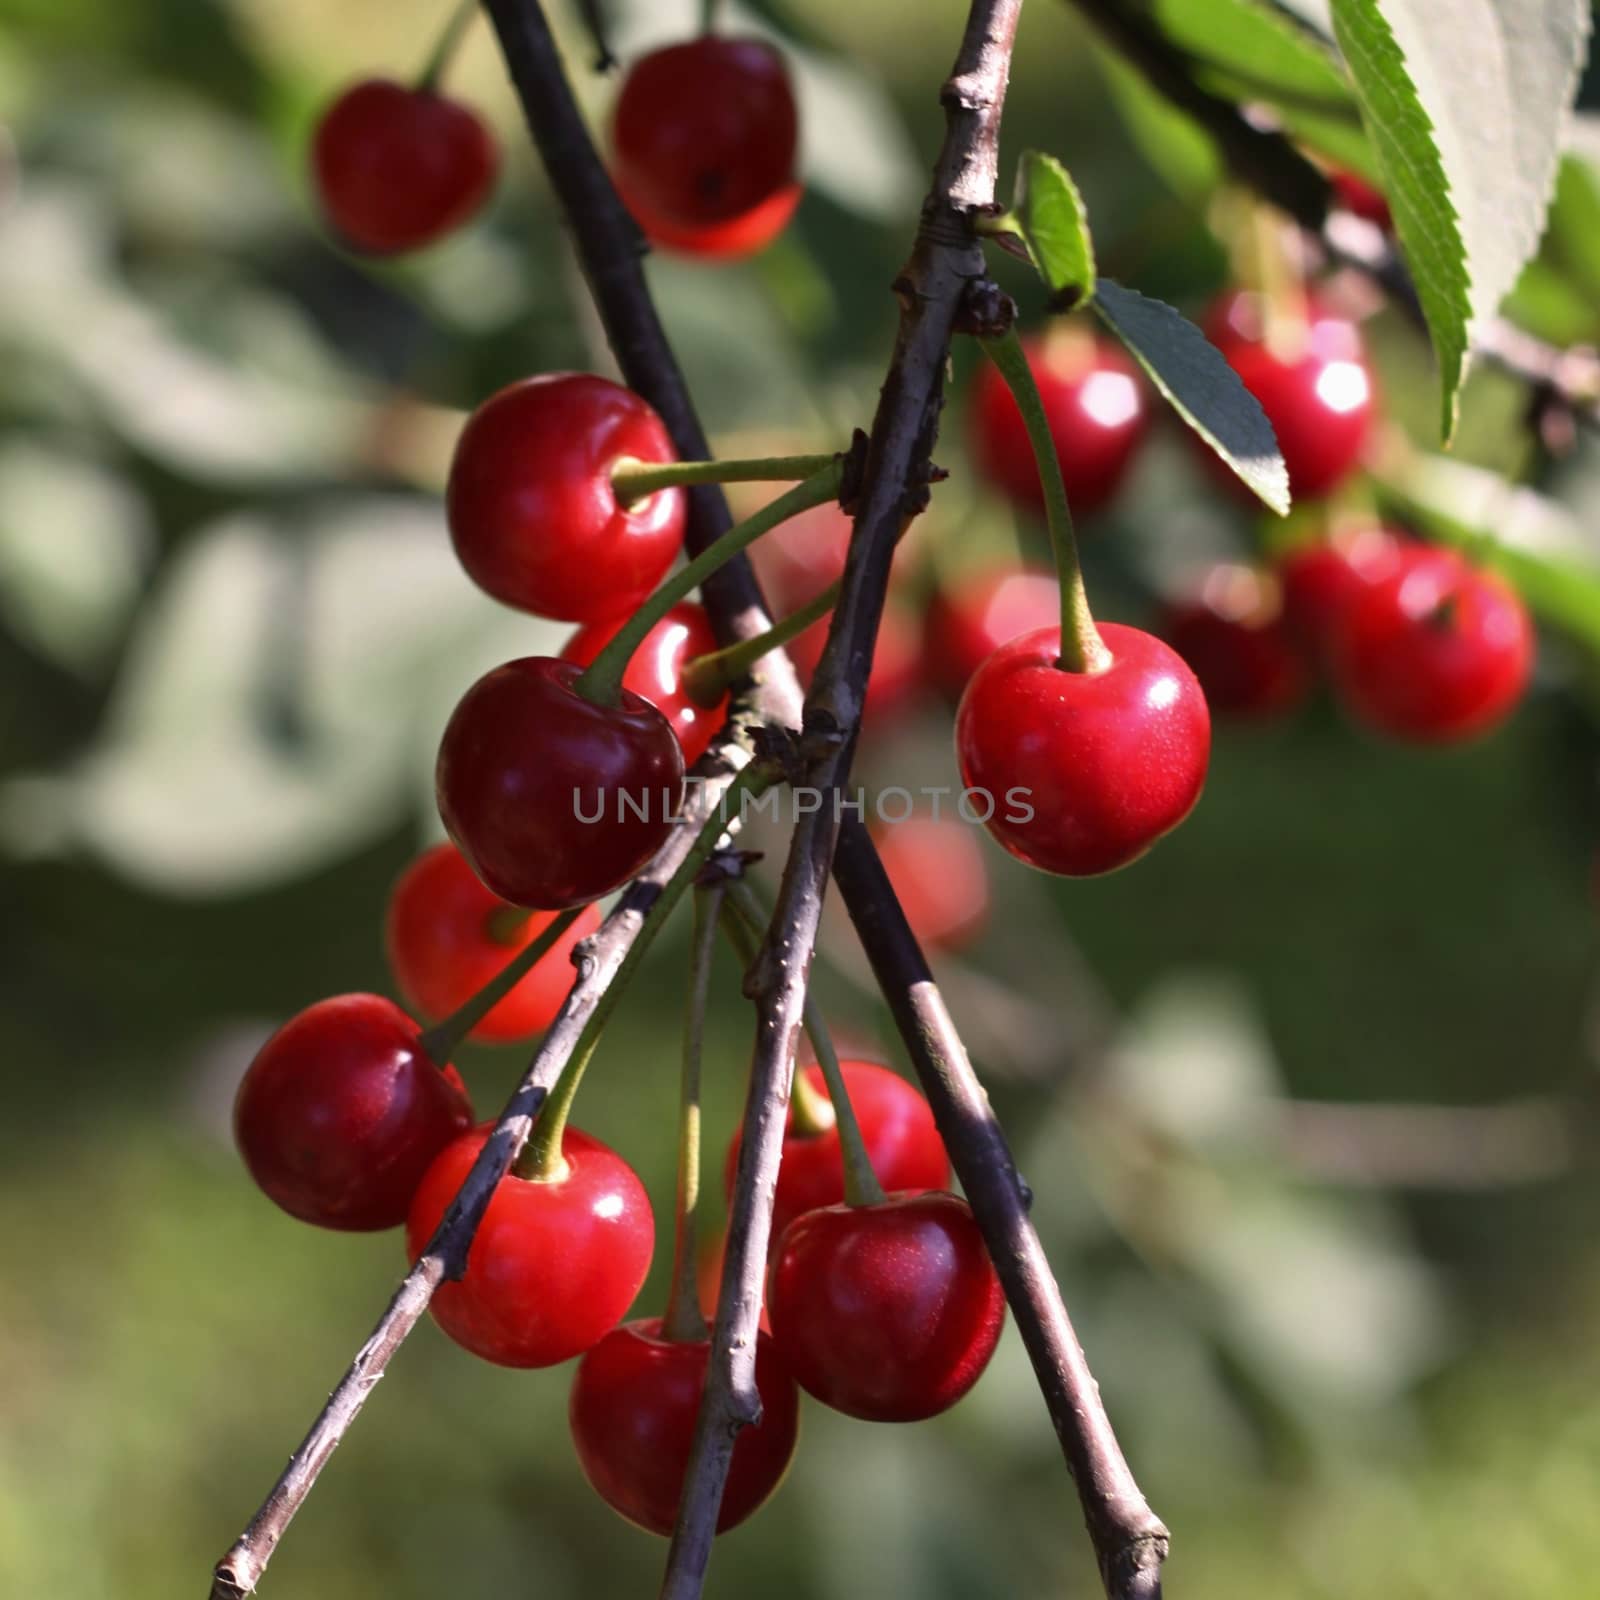 sour red cherries on the tree and green leaves